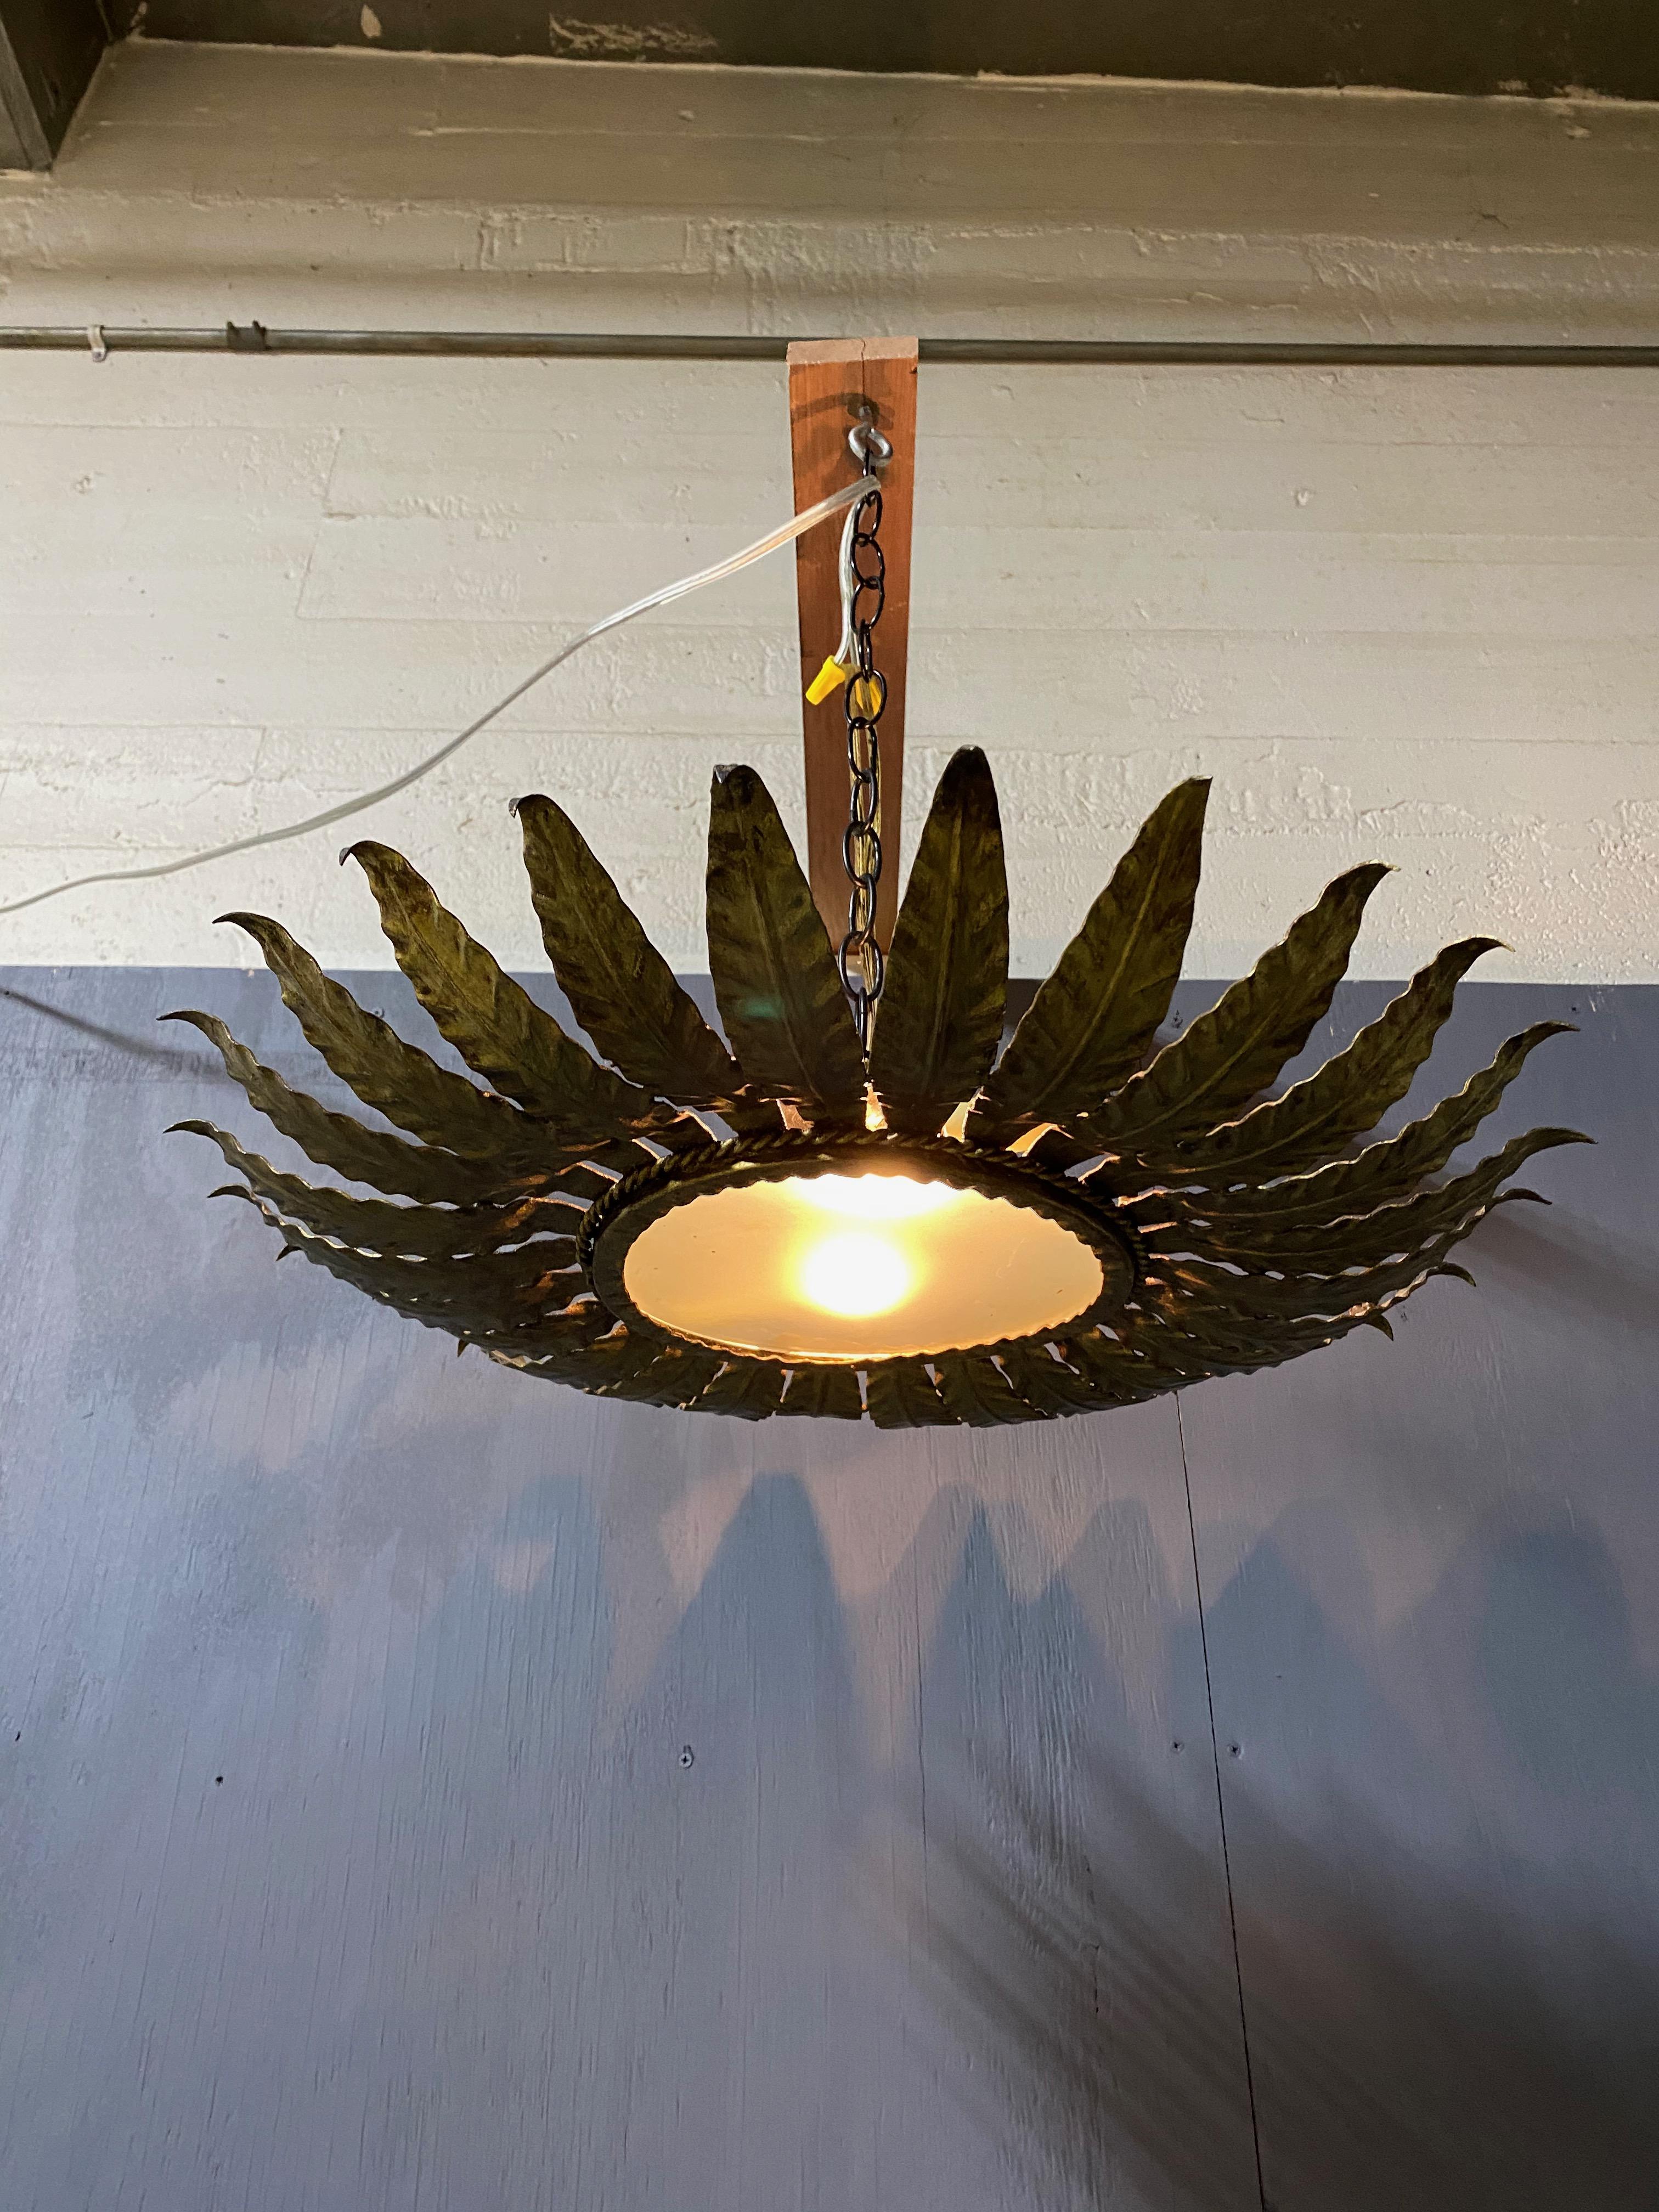 A large flush mount ceiling fixture with radiating leaf or feather motifs joined together with a twisted rope detail. The hand applied finish has a rich gold patina over a darker under coat. This fixture has been recently wired to accommodate two